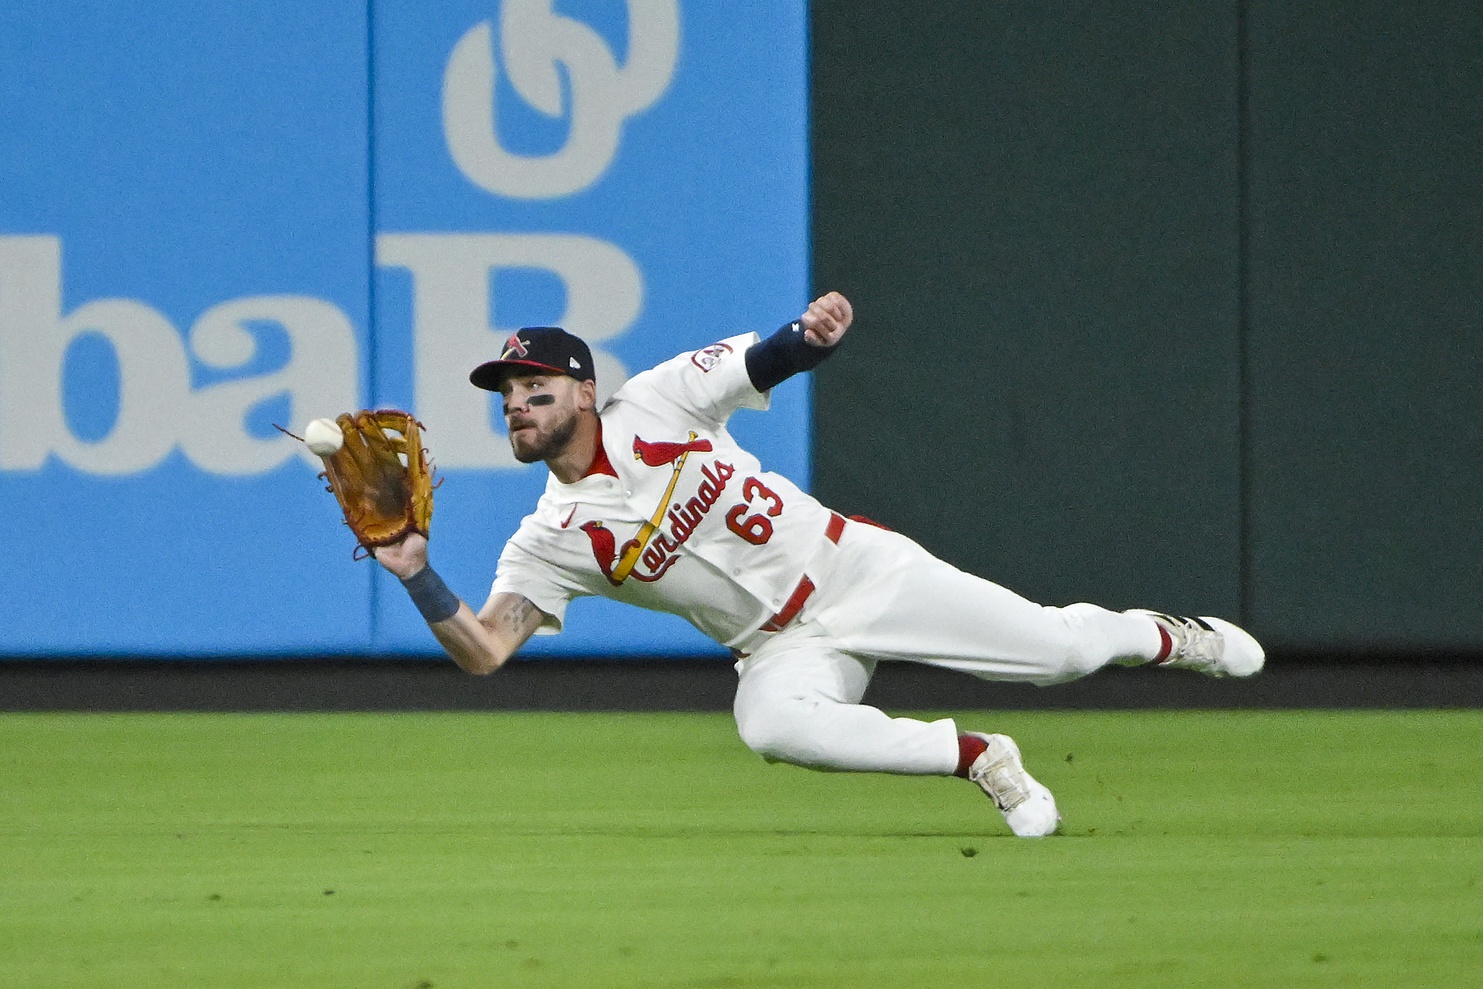 Bernie’s Redbird Review: Michael Siani’s value to the Cardinals continues to grow.